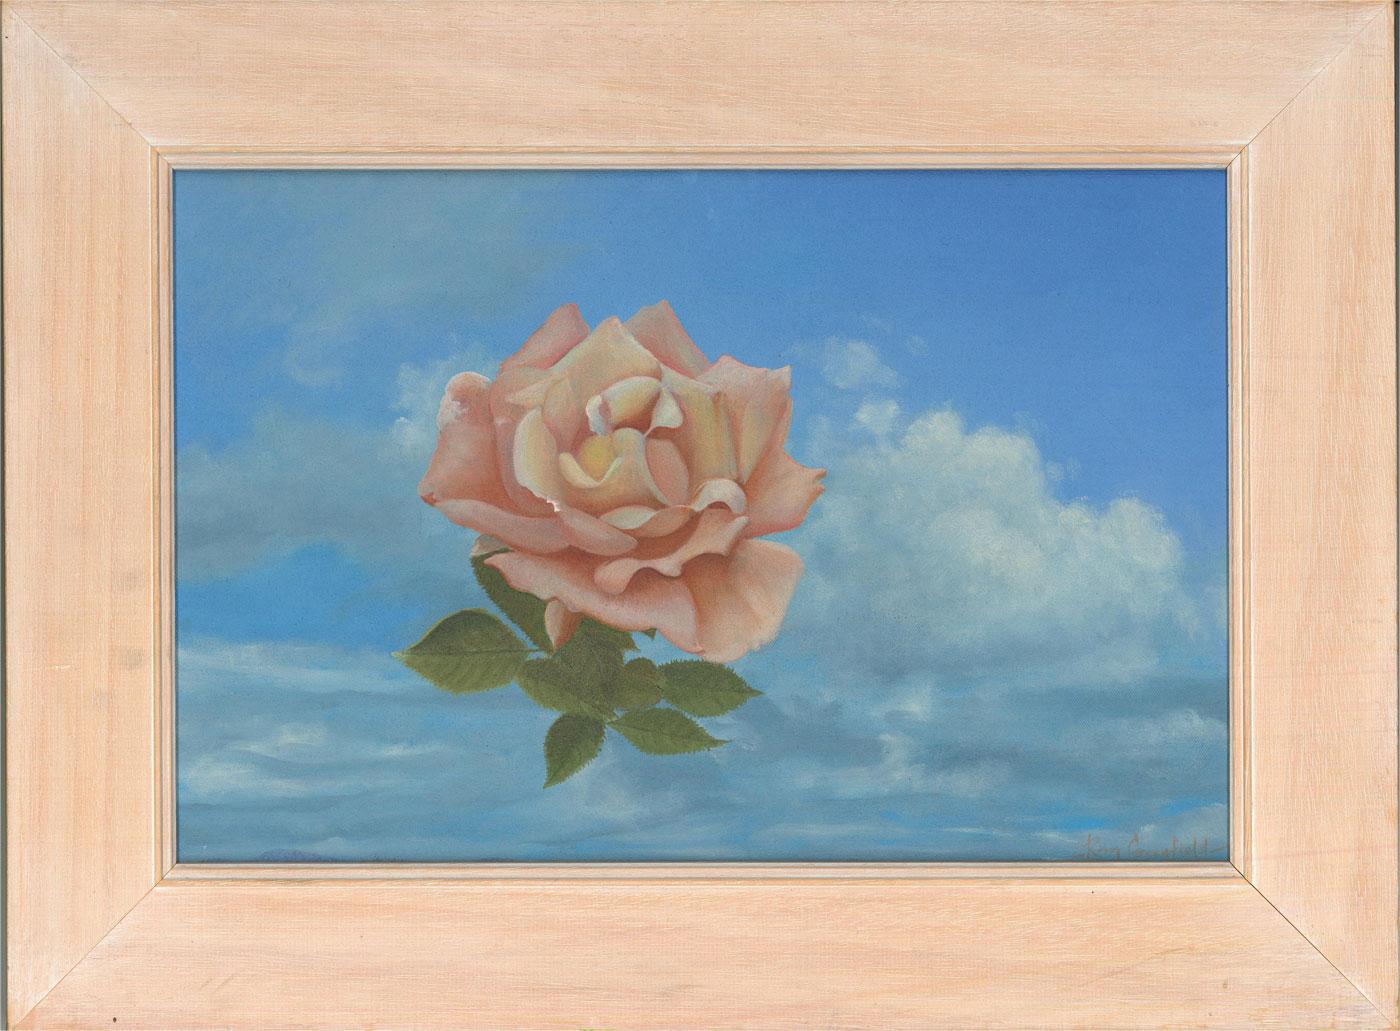 A vibrant oil painting by Scottish artist Ray Greenfield, depicting a "floating" pink rose on a blue sky background. Signed to the lower right-hand corner. The title is inscribed on the reverse. Well-presented in a light wooden frame. On canvas